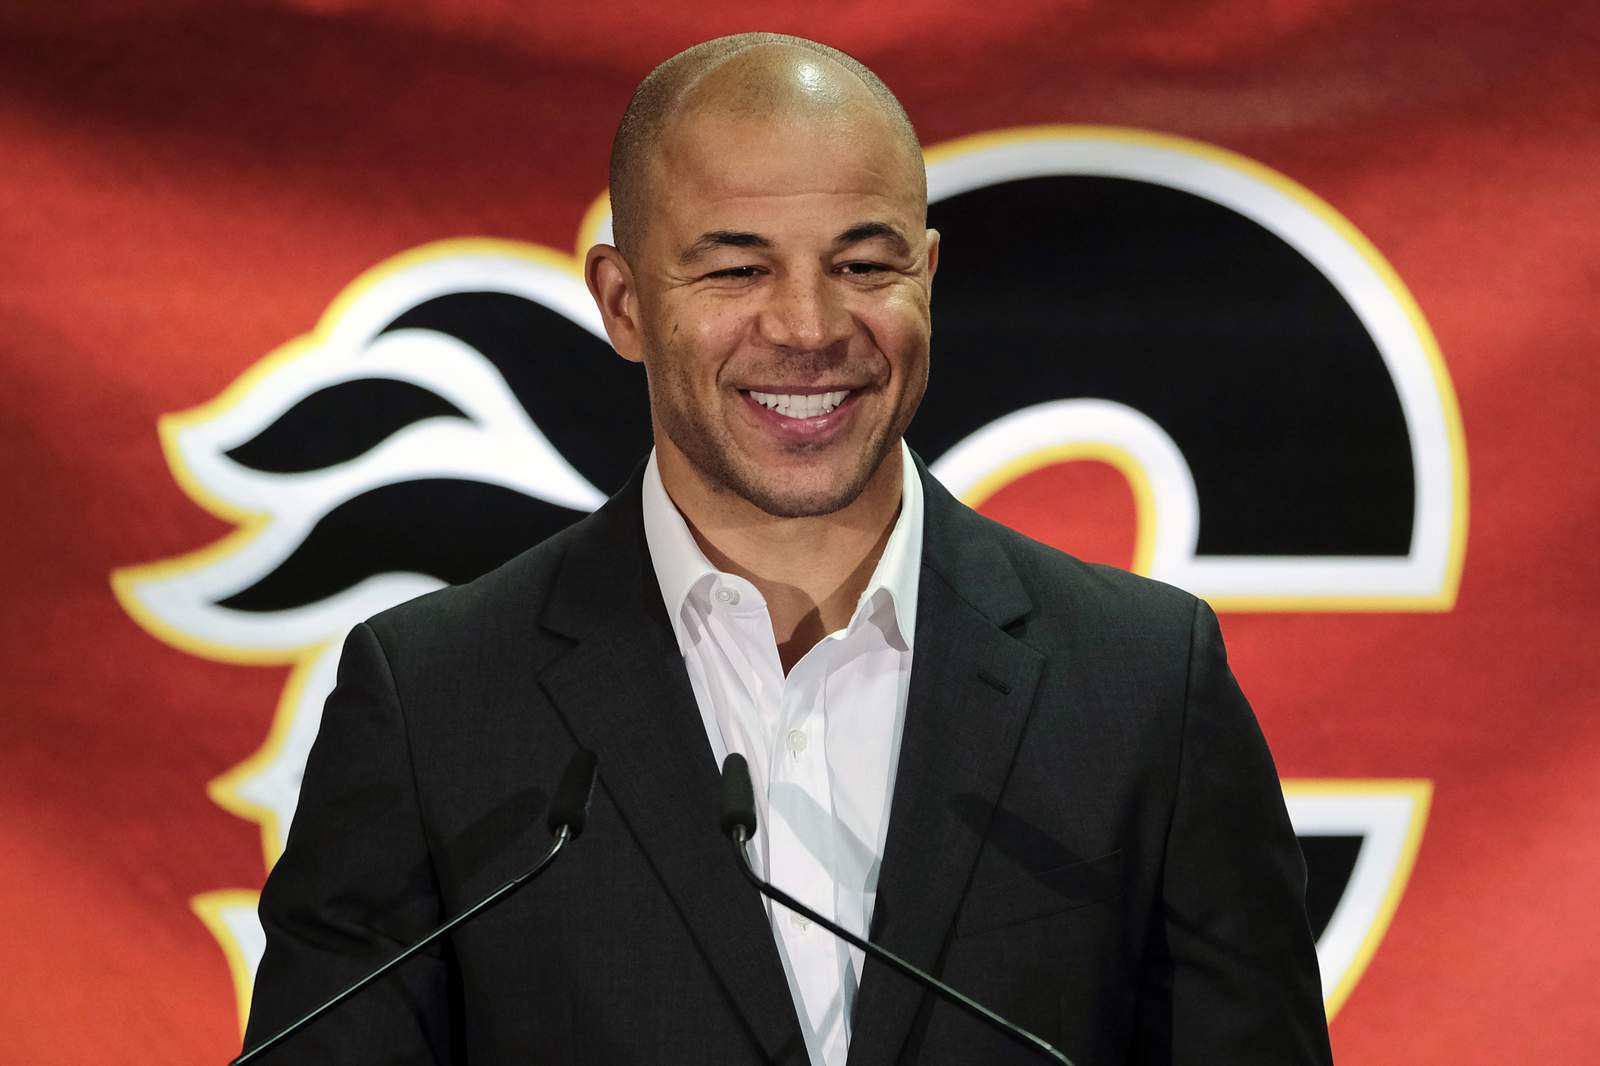 Iginla headlines 2020 Hall class as 4th Black player elected